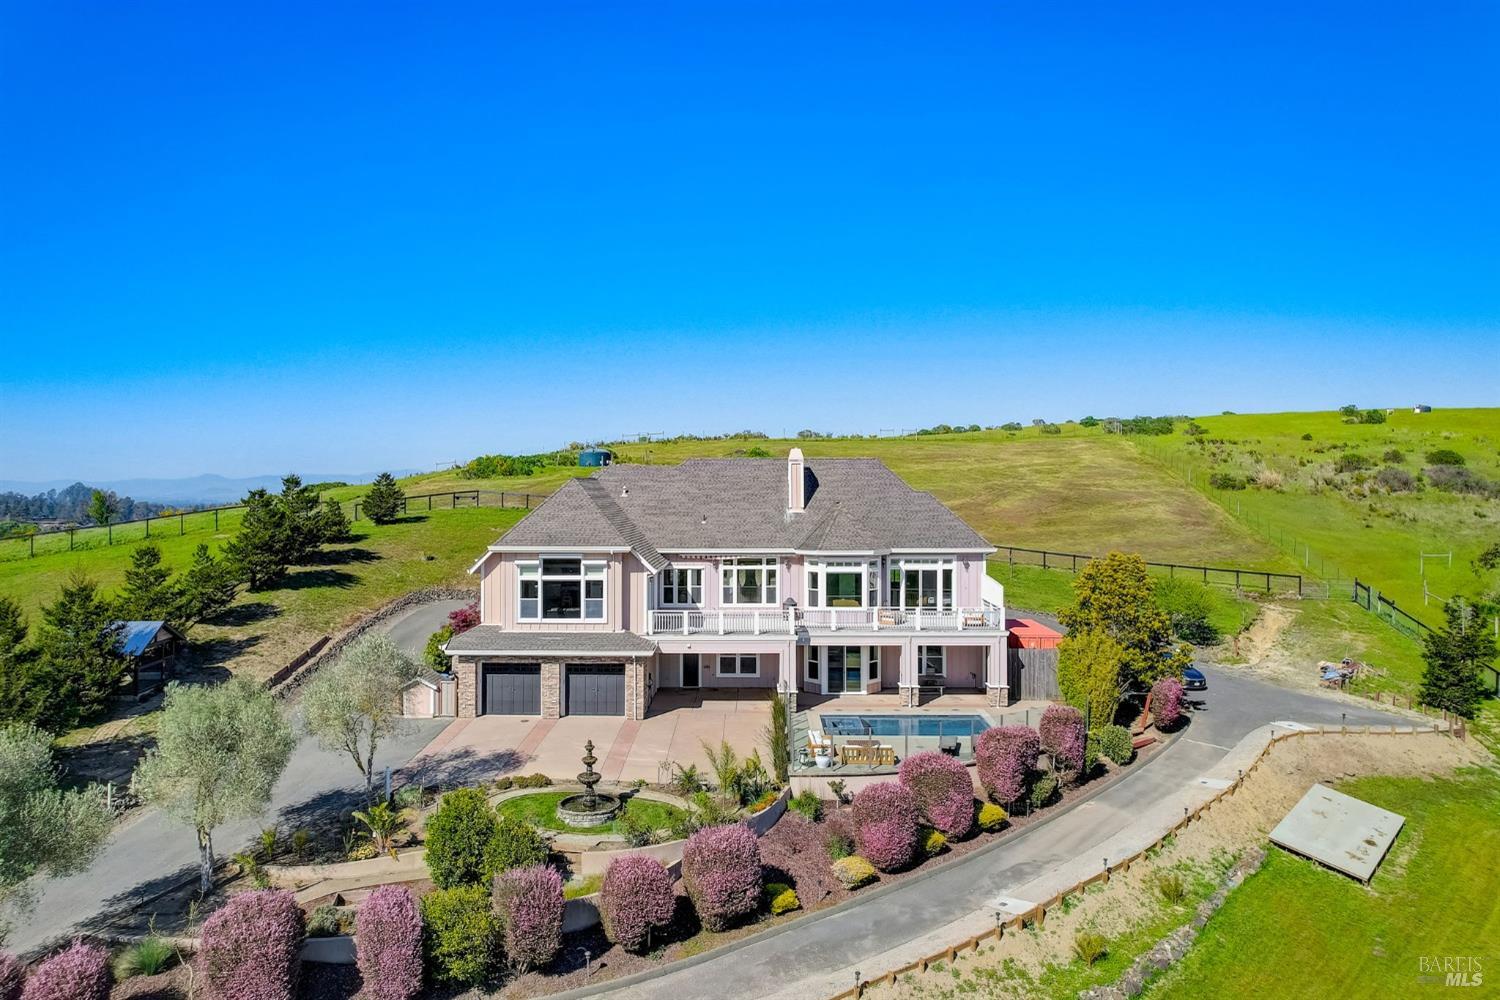 6425 Lovmark Way is a 6+ acre gated equestrian estate boasting panoramic westerly views over Sebastopol's hills towards the ocean and stunning sunsets. A custom barn and arena. Built in 2007, this 4BD/3.5BA 4246 sqft home offers an inviting floor plan illuminated by natural light and elegant finishes/amenities. A saltwater pool as well! The heart of the home is a large family room with cathedral ceiling, stone fp and deck access that flows directly from the kitchen. The stylish and open kitchen features top-tier appliances (Viking and Sub-Zero), a center island w/seating, abundant cabinetry and countertops, and breakfast area. Hardwood floors and 10ft ceilings. The expansive and luxury primary suite w/deck access on the main level presents a sitting area, spa-like BA and walk-in closet with laundry. The lower level houses three additional BDs (one en-suite), a media room, family room with direct access to the pool area, laundry room, storage and bonus room. Other amenities incl: dual zone AC on each floor, central vac, EV charging, upgraded electrical and ducting. Parking for many cars, RV/recreational toys. Plans/prelim inspection in place for a future ADU. A must see for those wanting luxury and privacy, with views! Near top-rated schools and a short drive to 101/DT Sebastopol